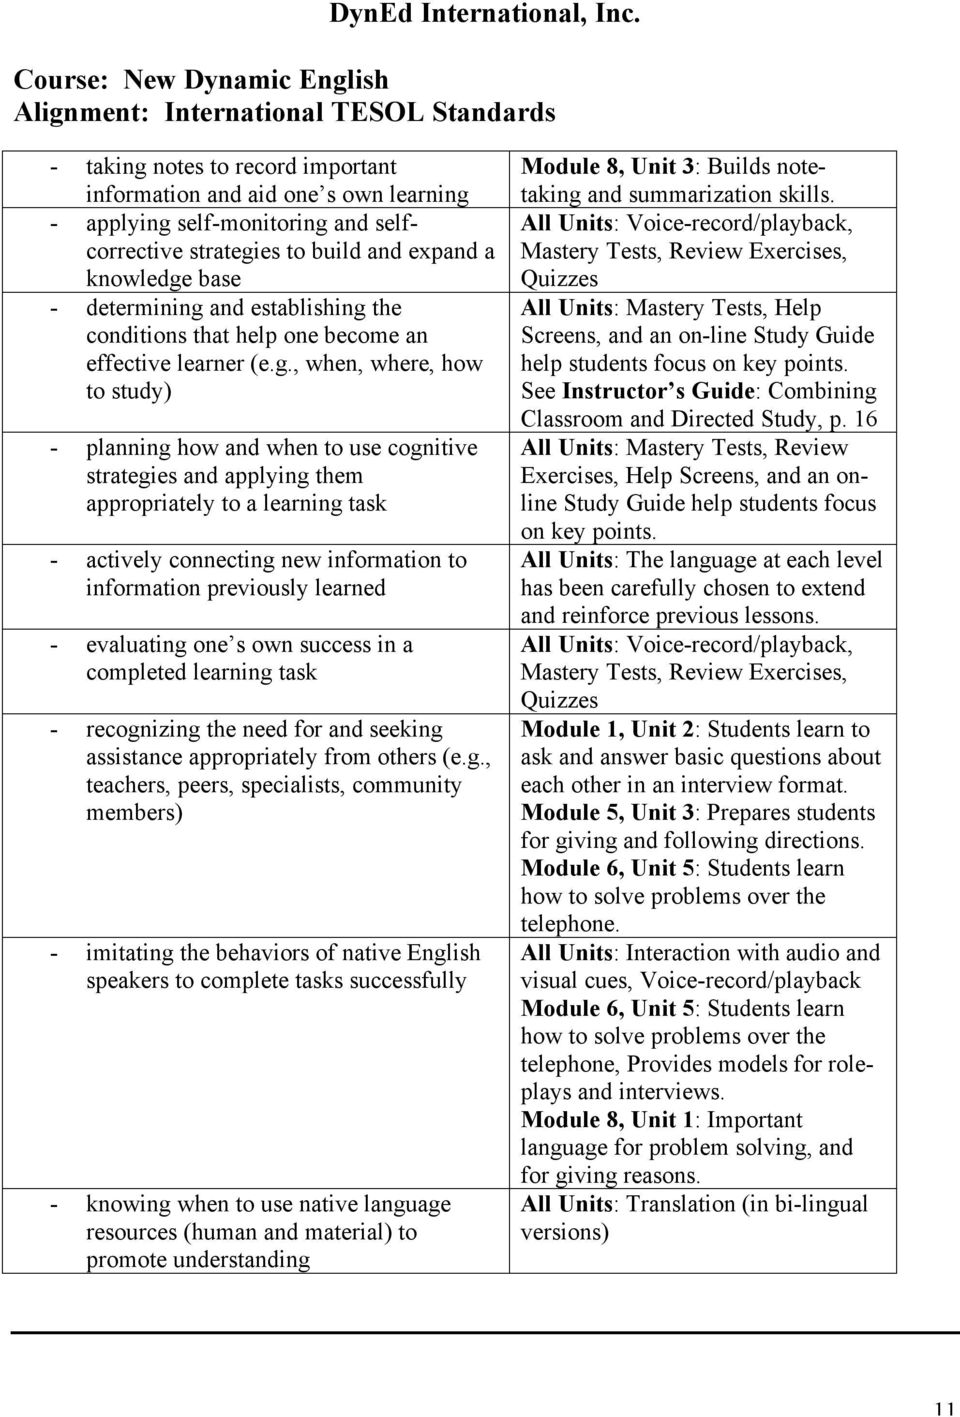 , when, where, how to study) - planning how and when to use cognitive strategies and applying them appropriately to a learning task - actively connecting new information to information previously